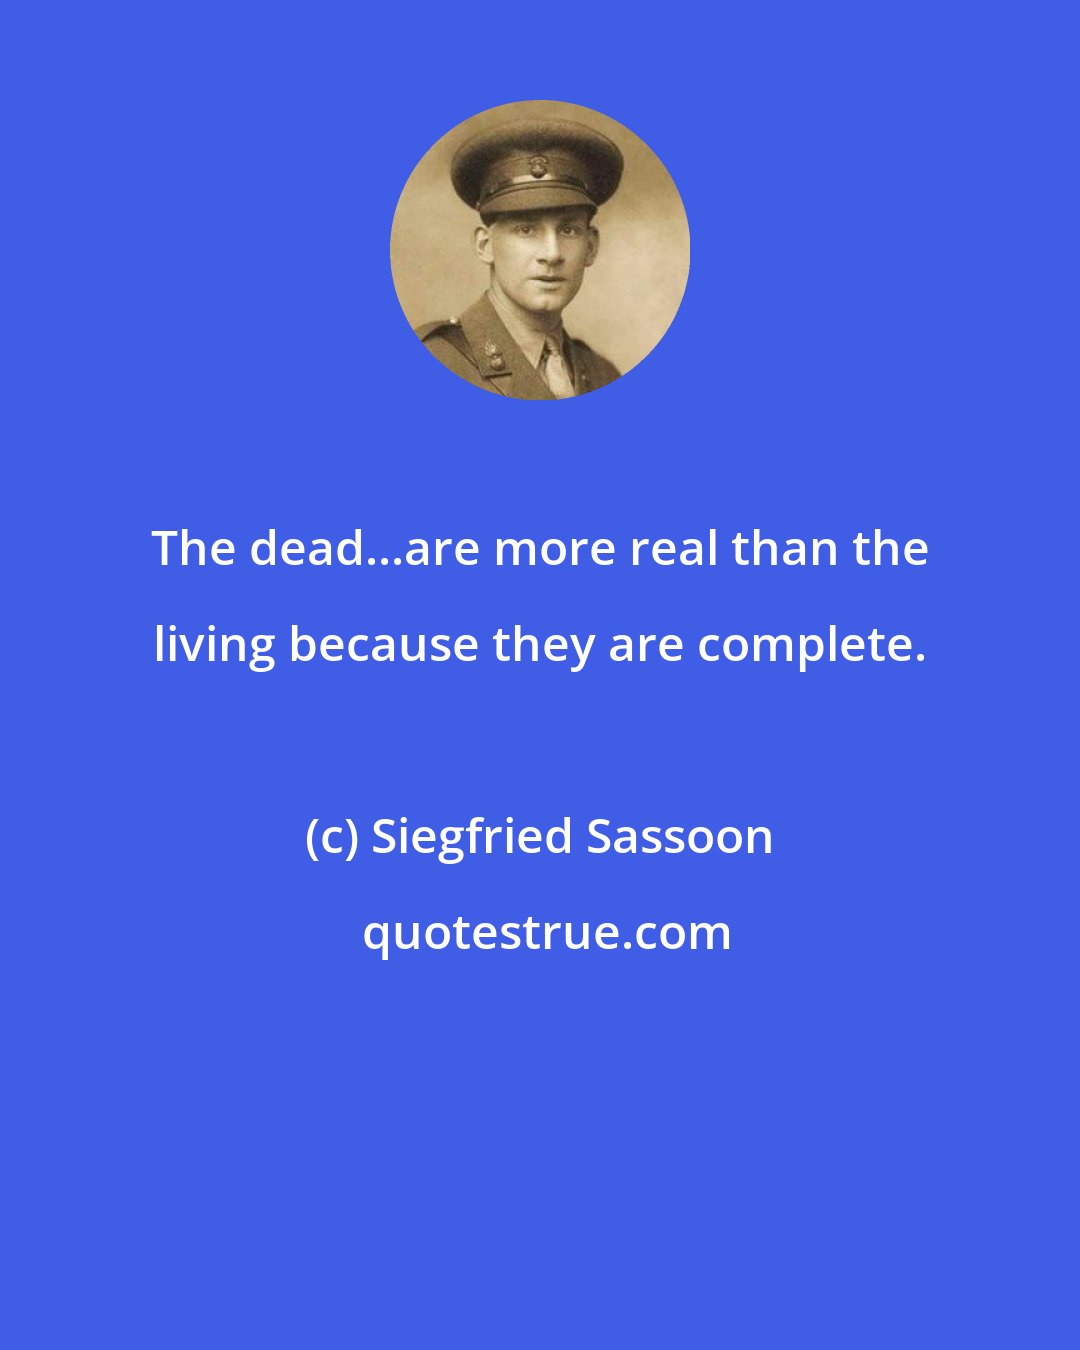 Siegfried Sassoon: The dead...are more real than the living because they are complete.